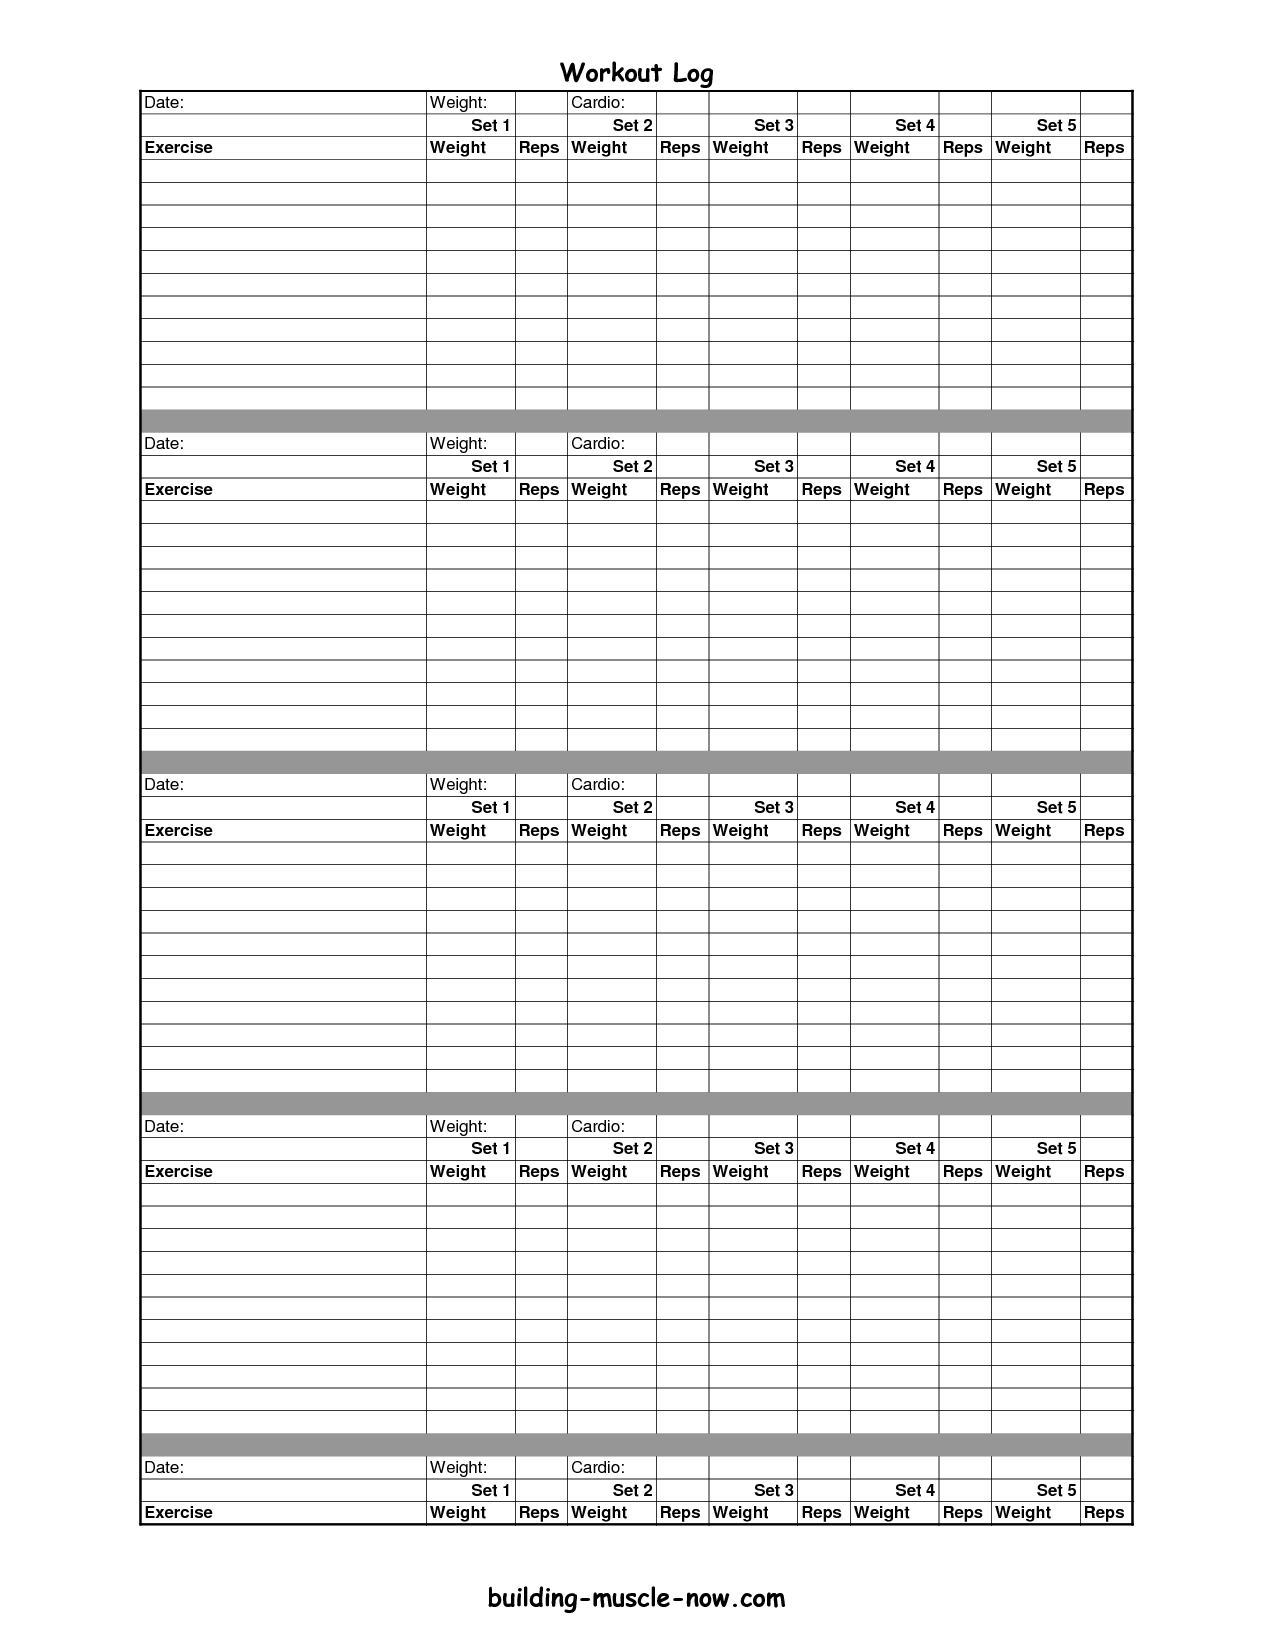 Fitness Journal Printable Google Search (Fitness Routine Workout